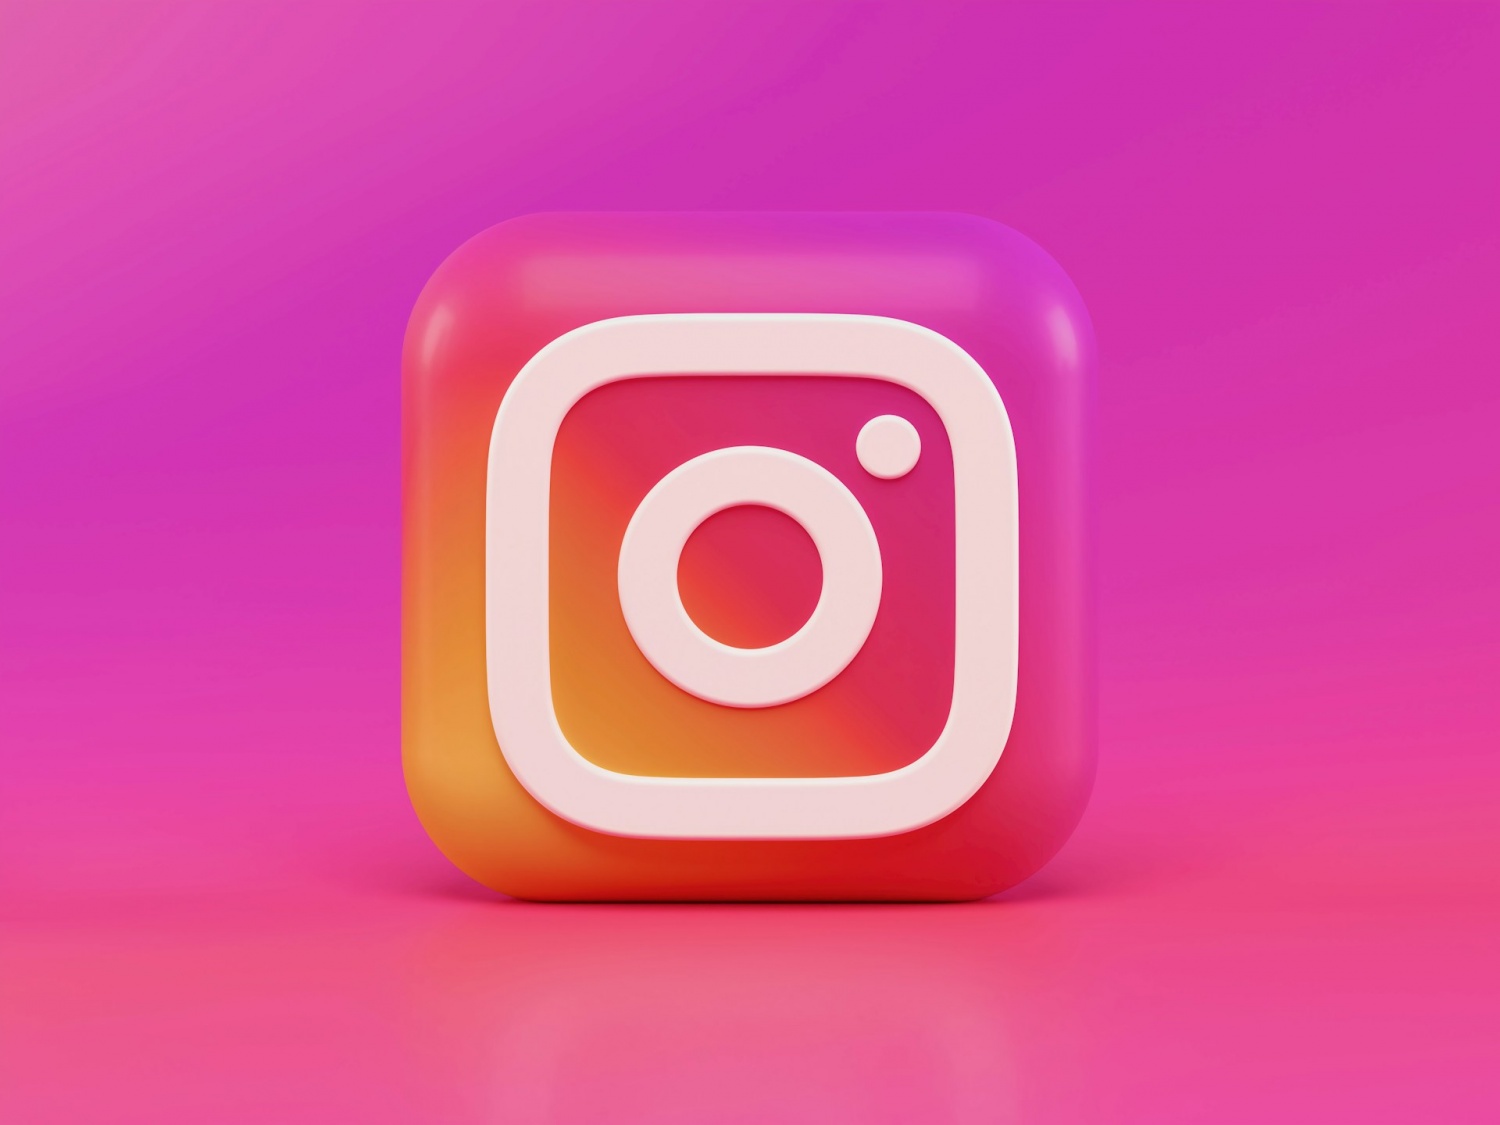 Instagram Algorithm Will Focus More on Original Content, Straying Away From Reposted Videos, Photos